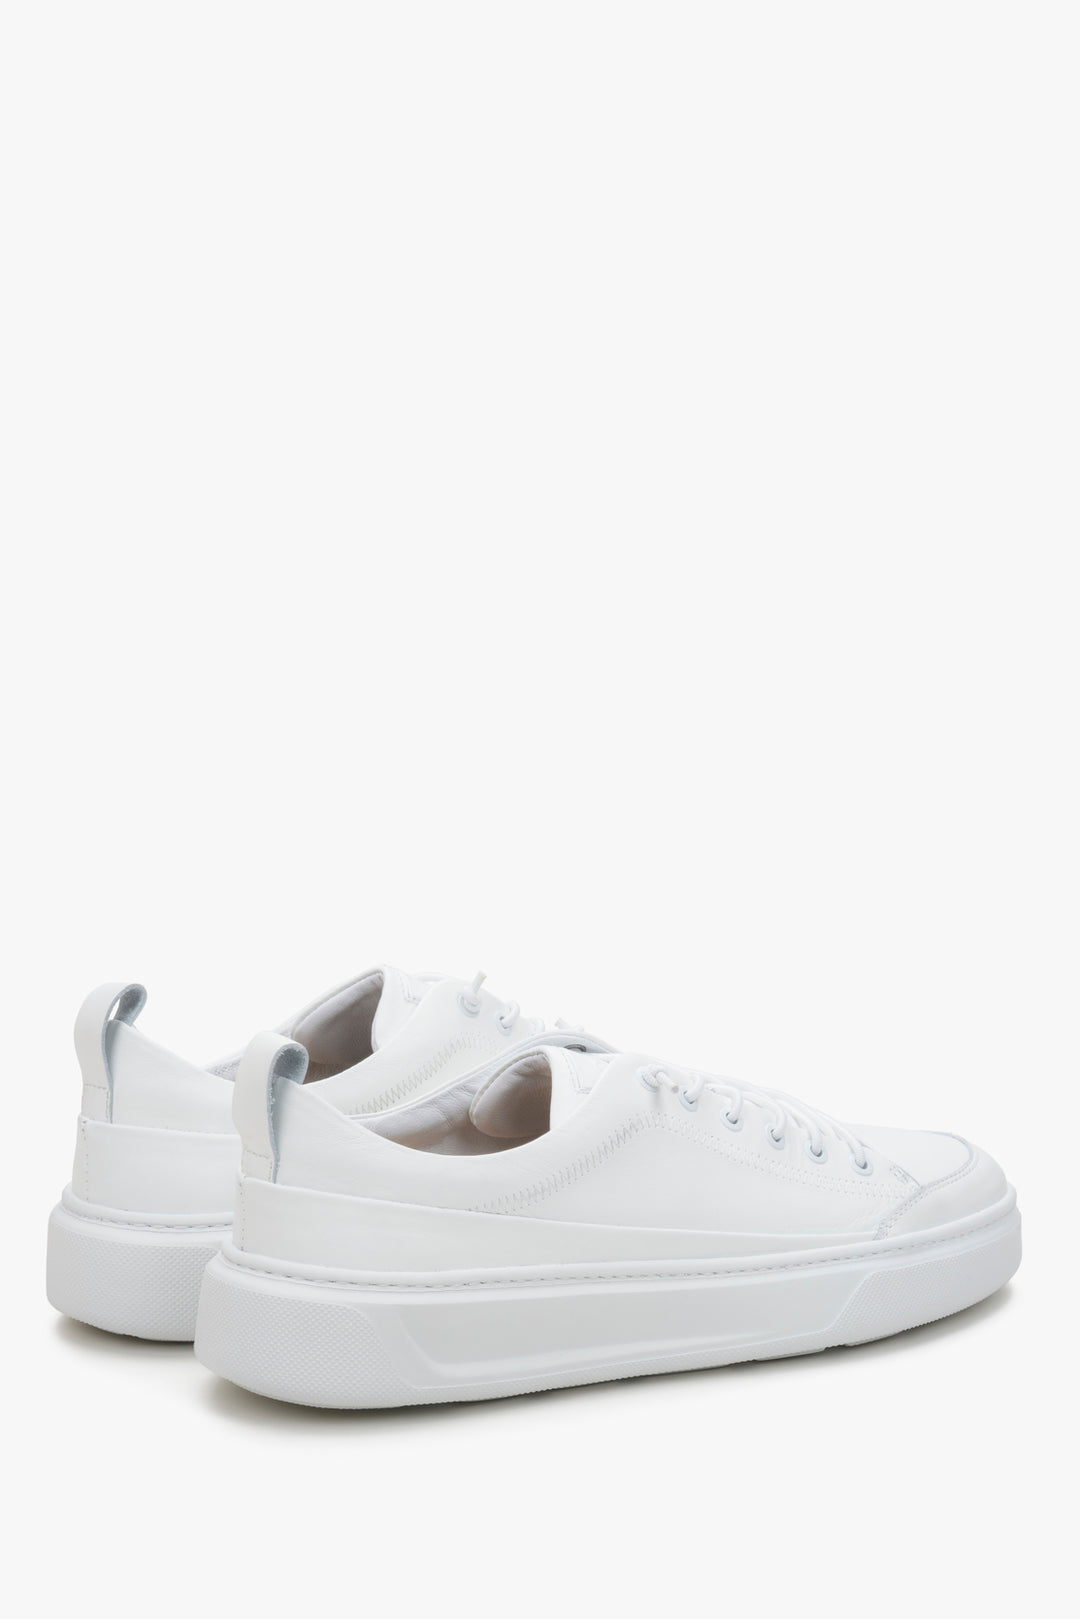 Men's white sneakers in genuine leather by Estro - close-up on the side line and heel counter.